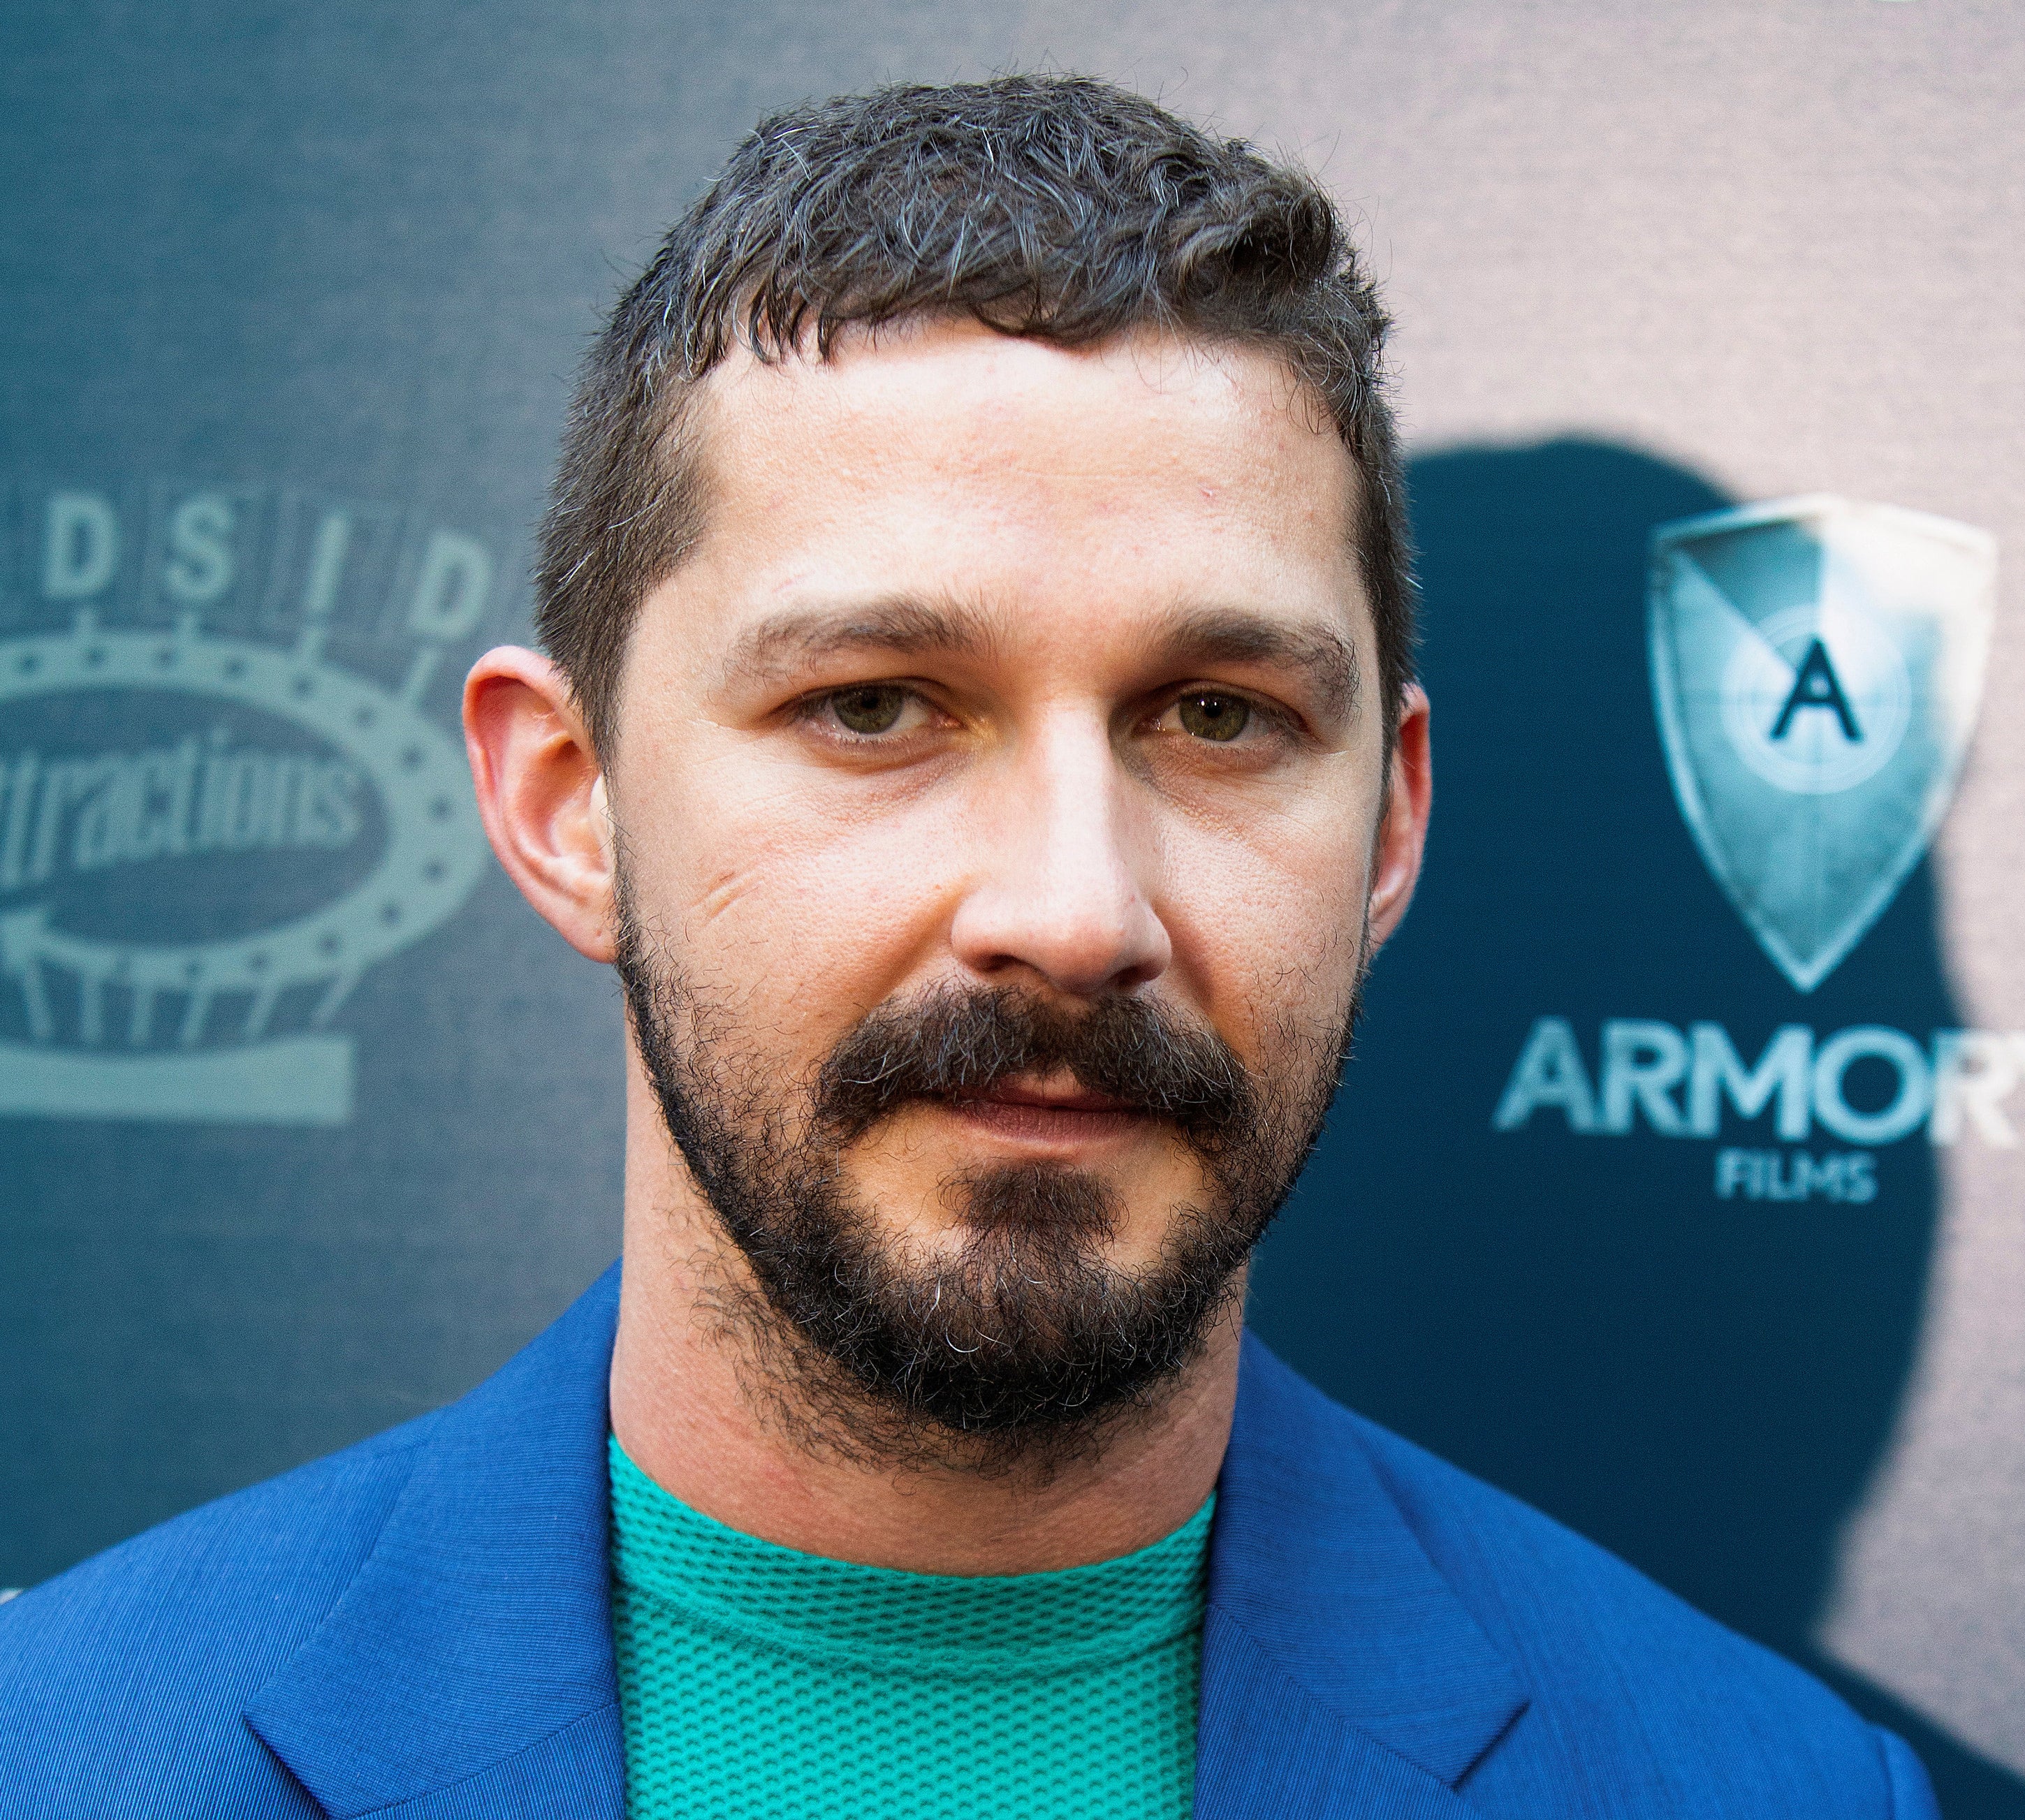 Shia LaBeouf arrives for the screening of the film The Peanut Butter Falcon in Los Angeles, California, U.S., August 1, 2019.